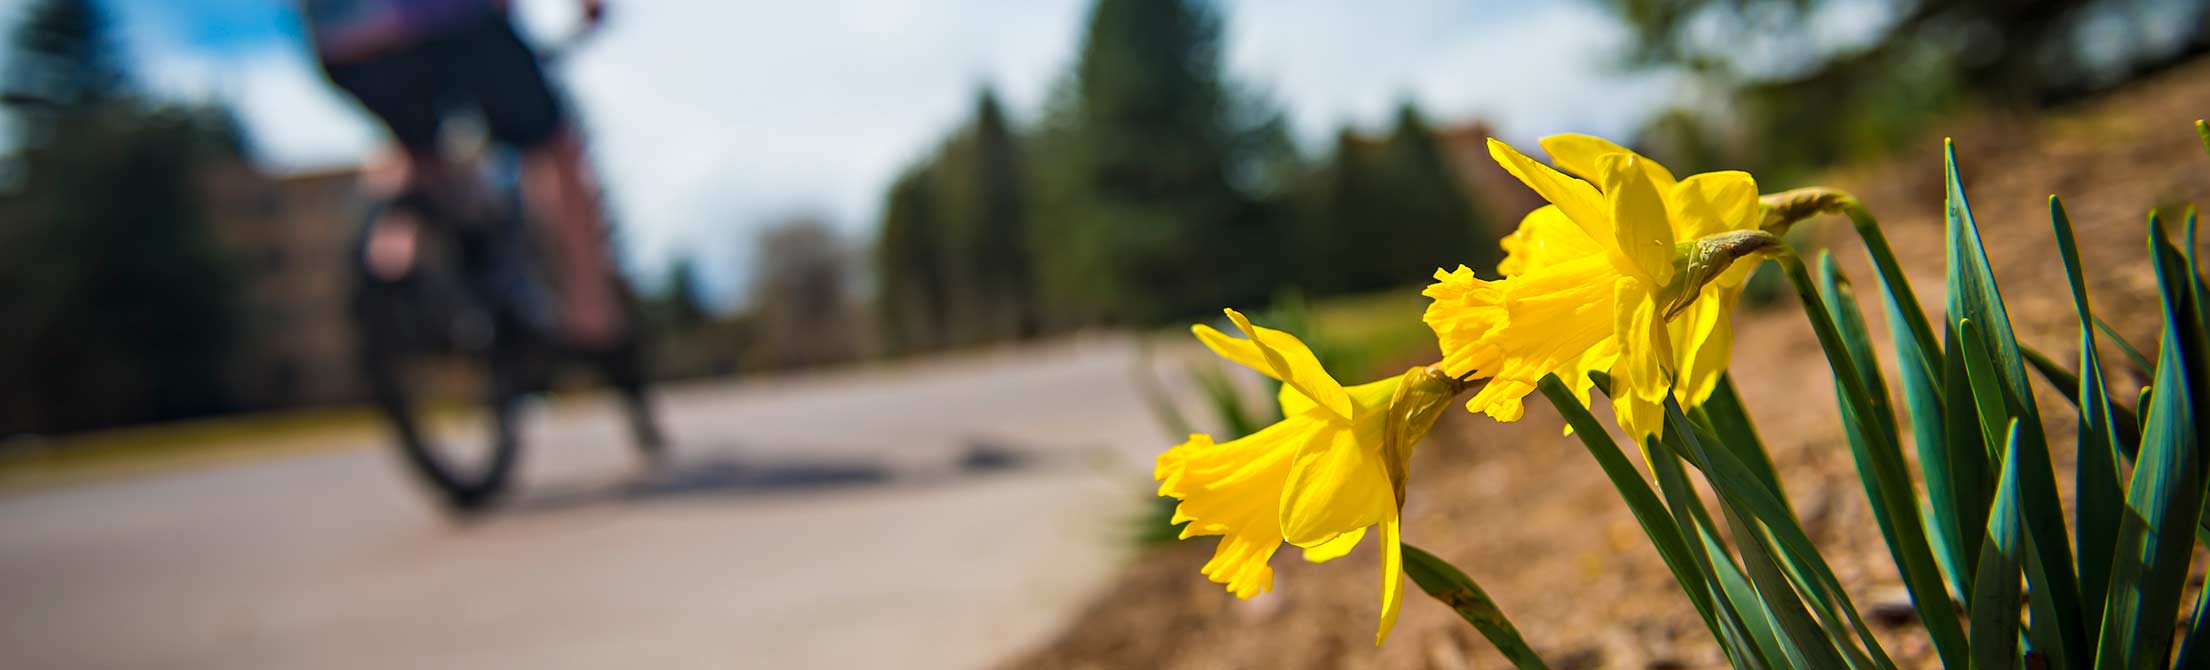 a bike rider in the background with yellow daffodils in the foreground